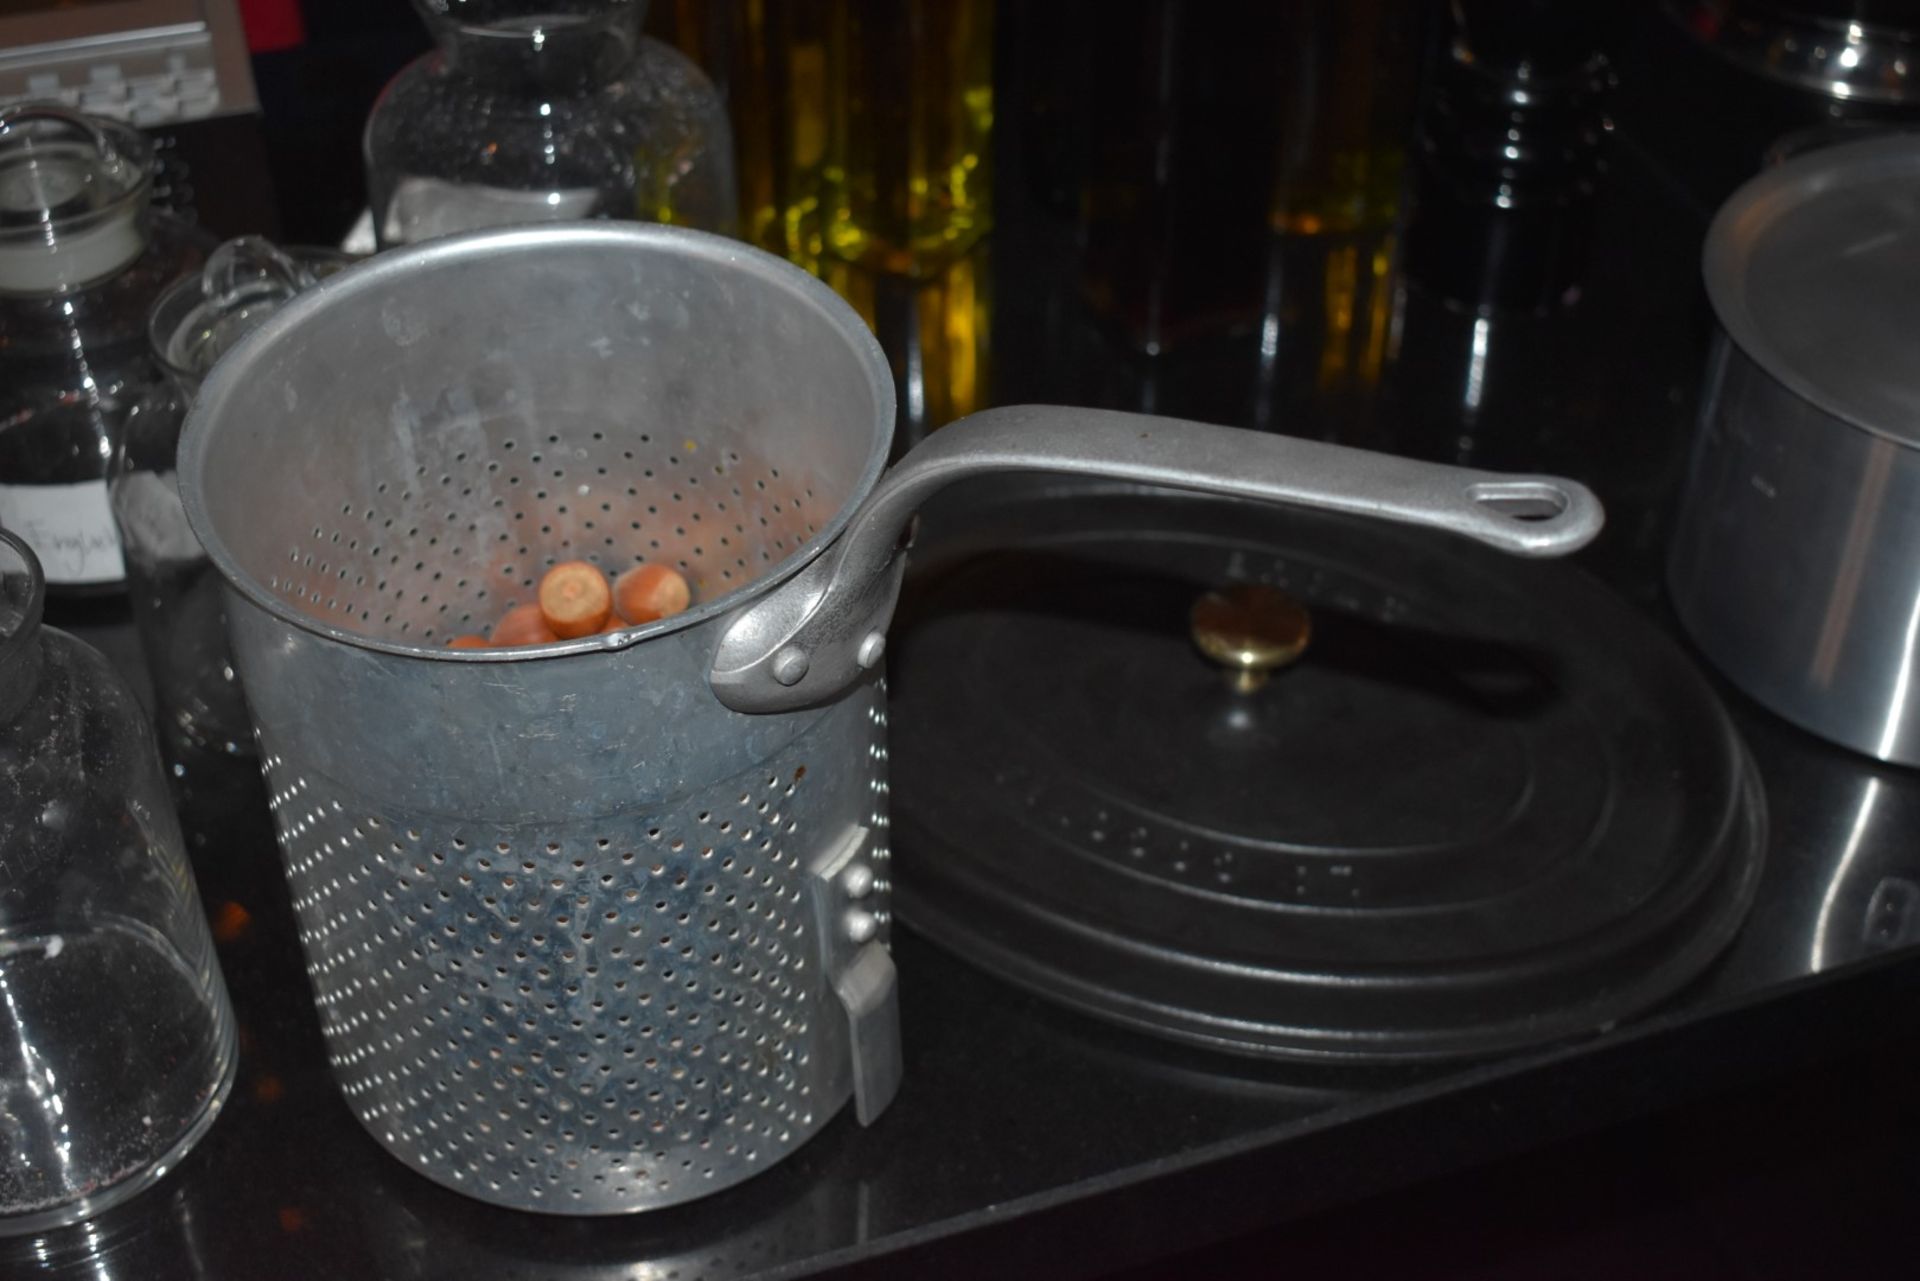 Approx 80 x Assorted Items of Various Kitchenware - Includes Pans, Utensils, Candles, Colanders, - Image 9 of 21